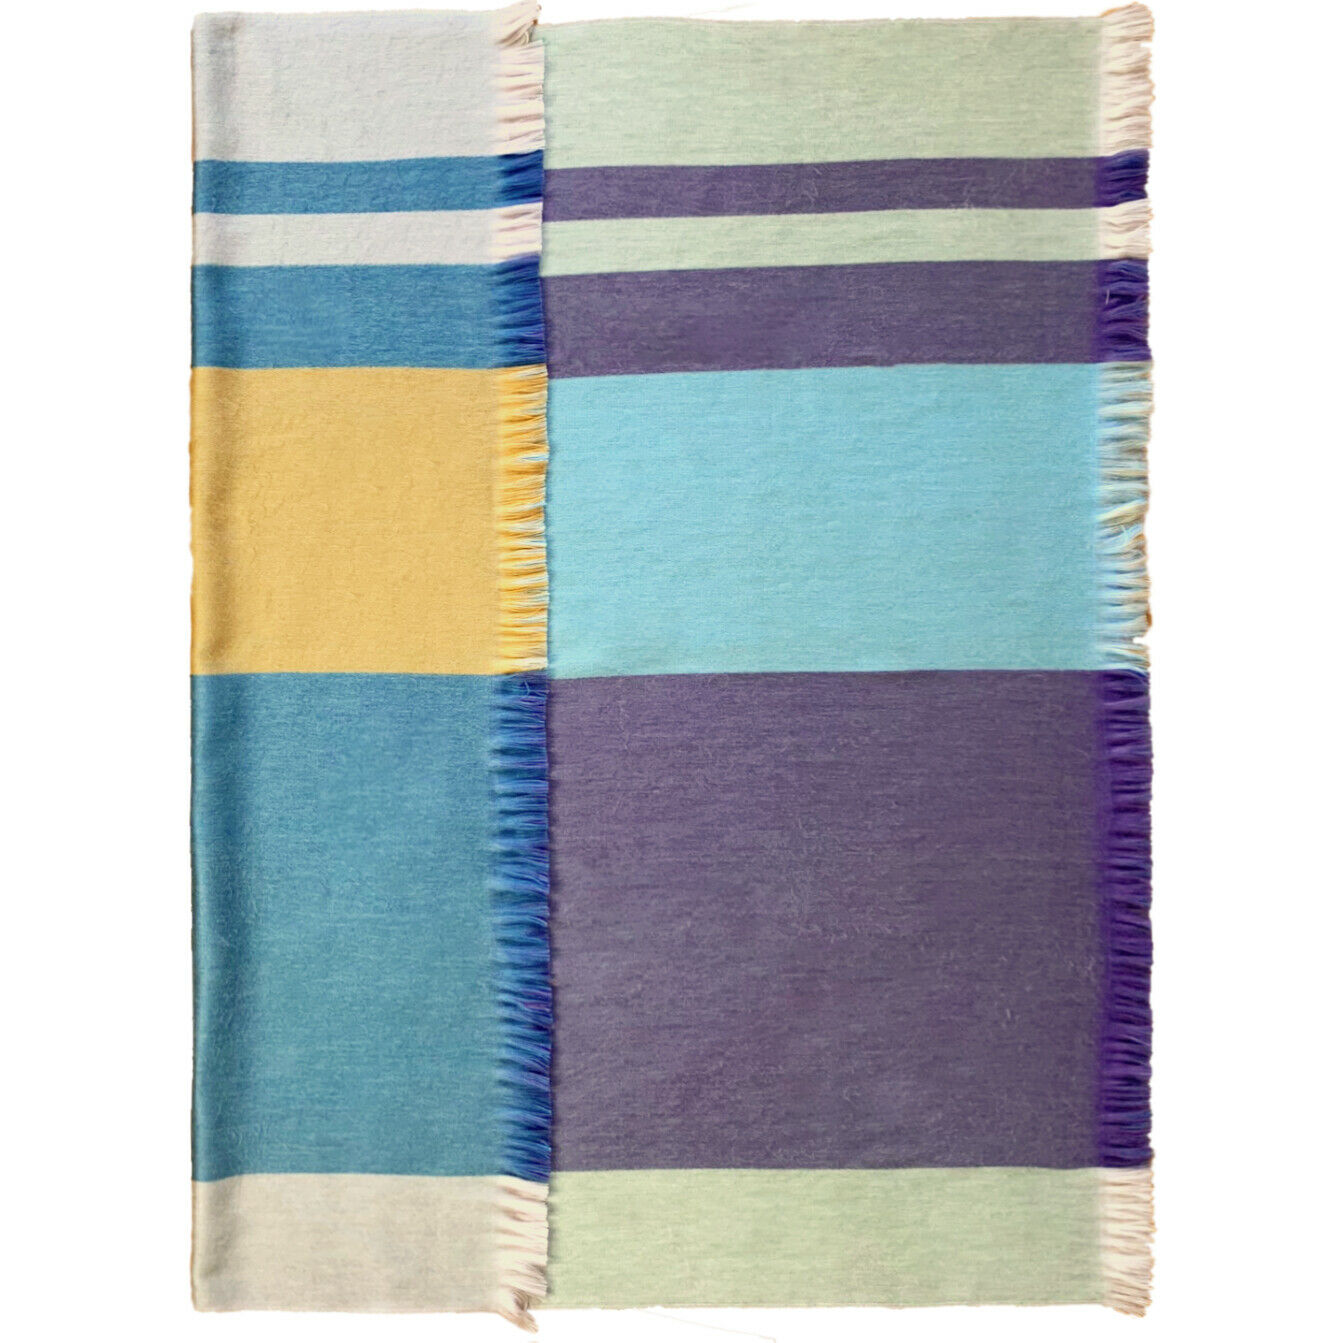 Soft & Warm baby alpaca wool reversible double-sided throw blanket / sofa cover - small 64" x 54"